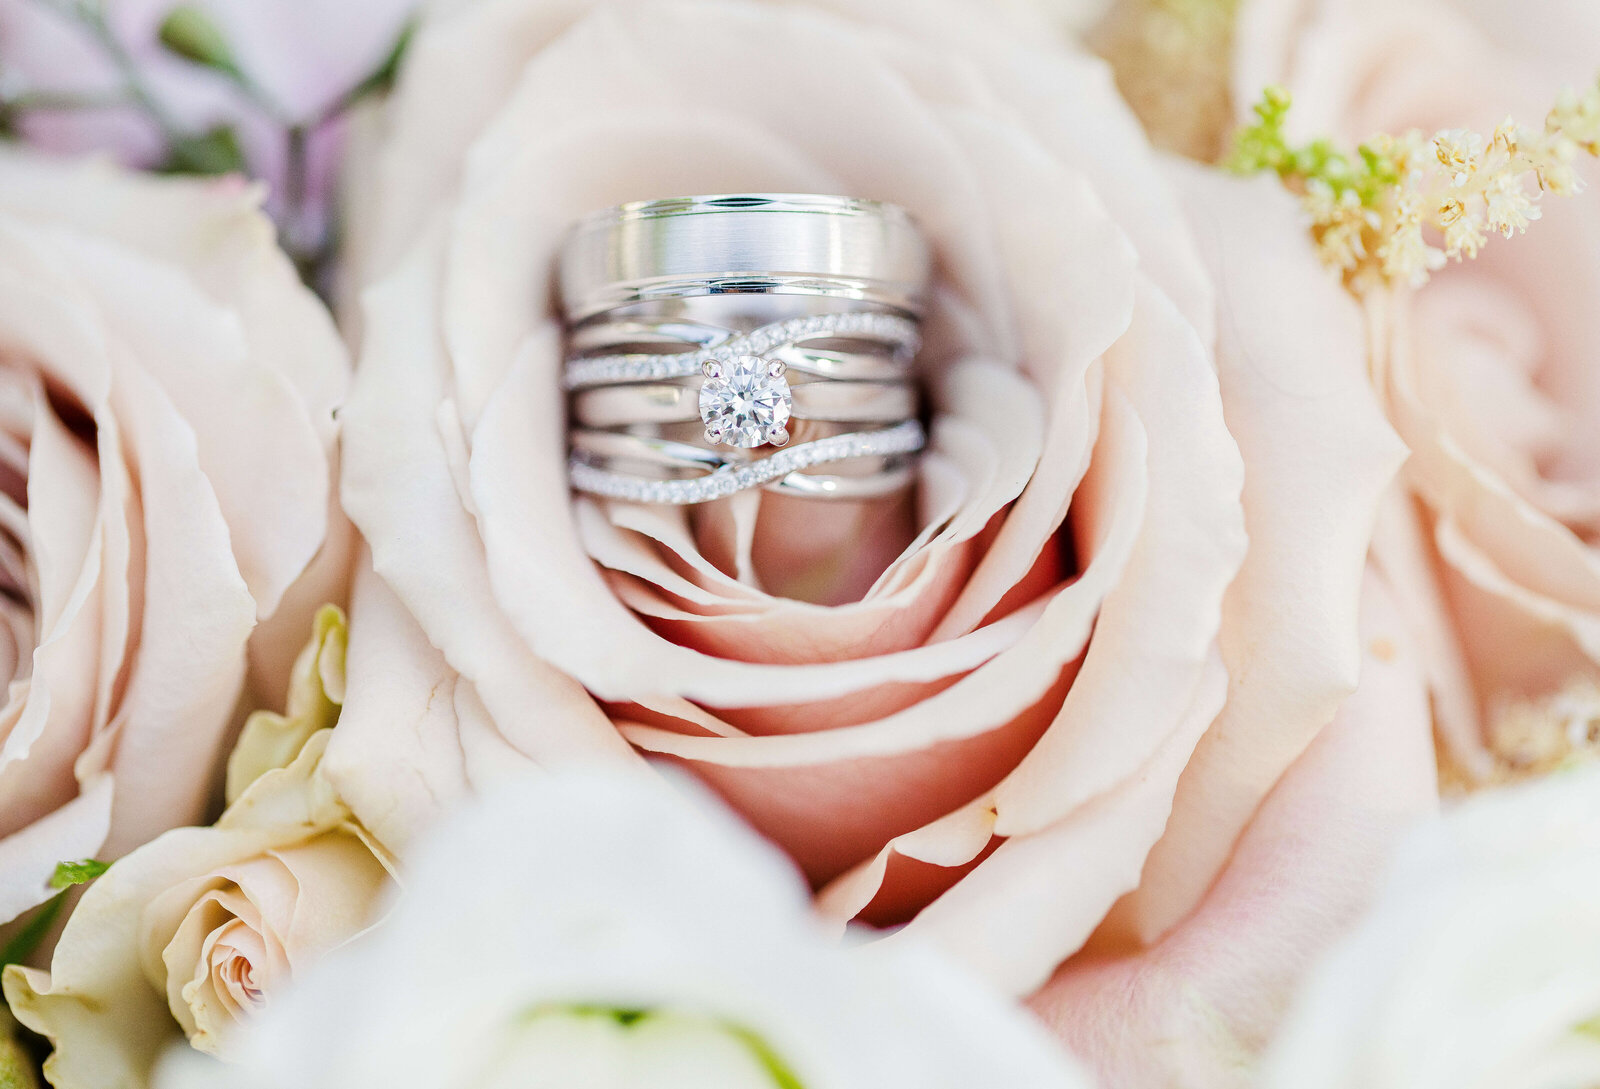 Wedding and engagement rings in a pink rose - details photo on a spring wedding day